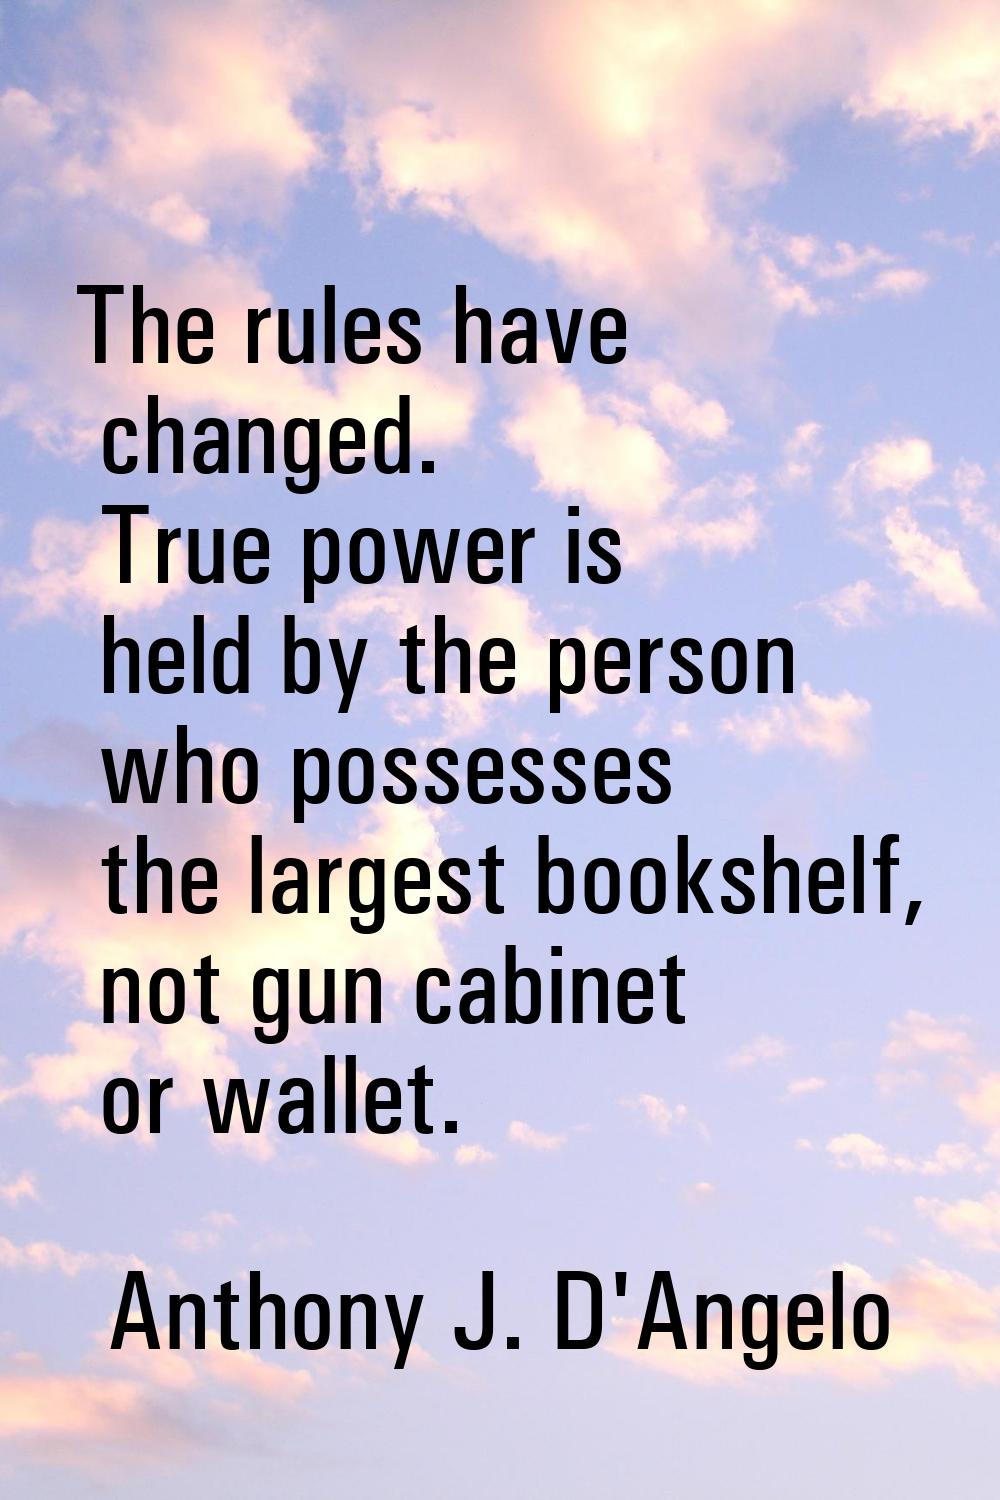 The rules have changed. True power is held by the person who possesses the largest bookshelf, not g